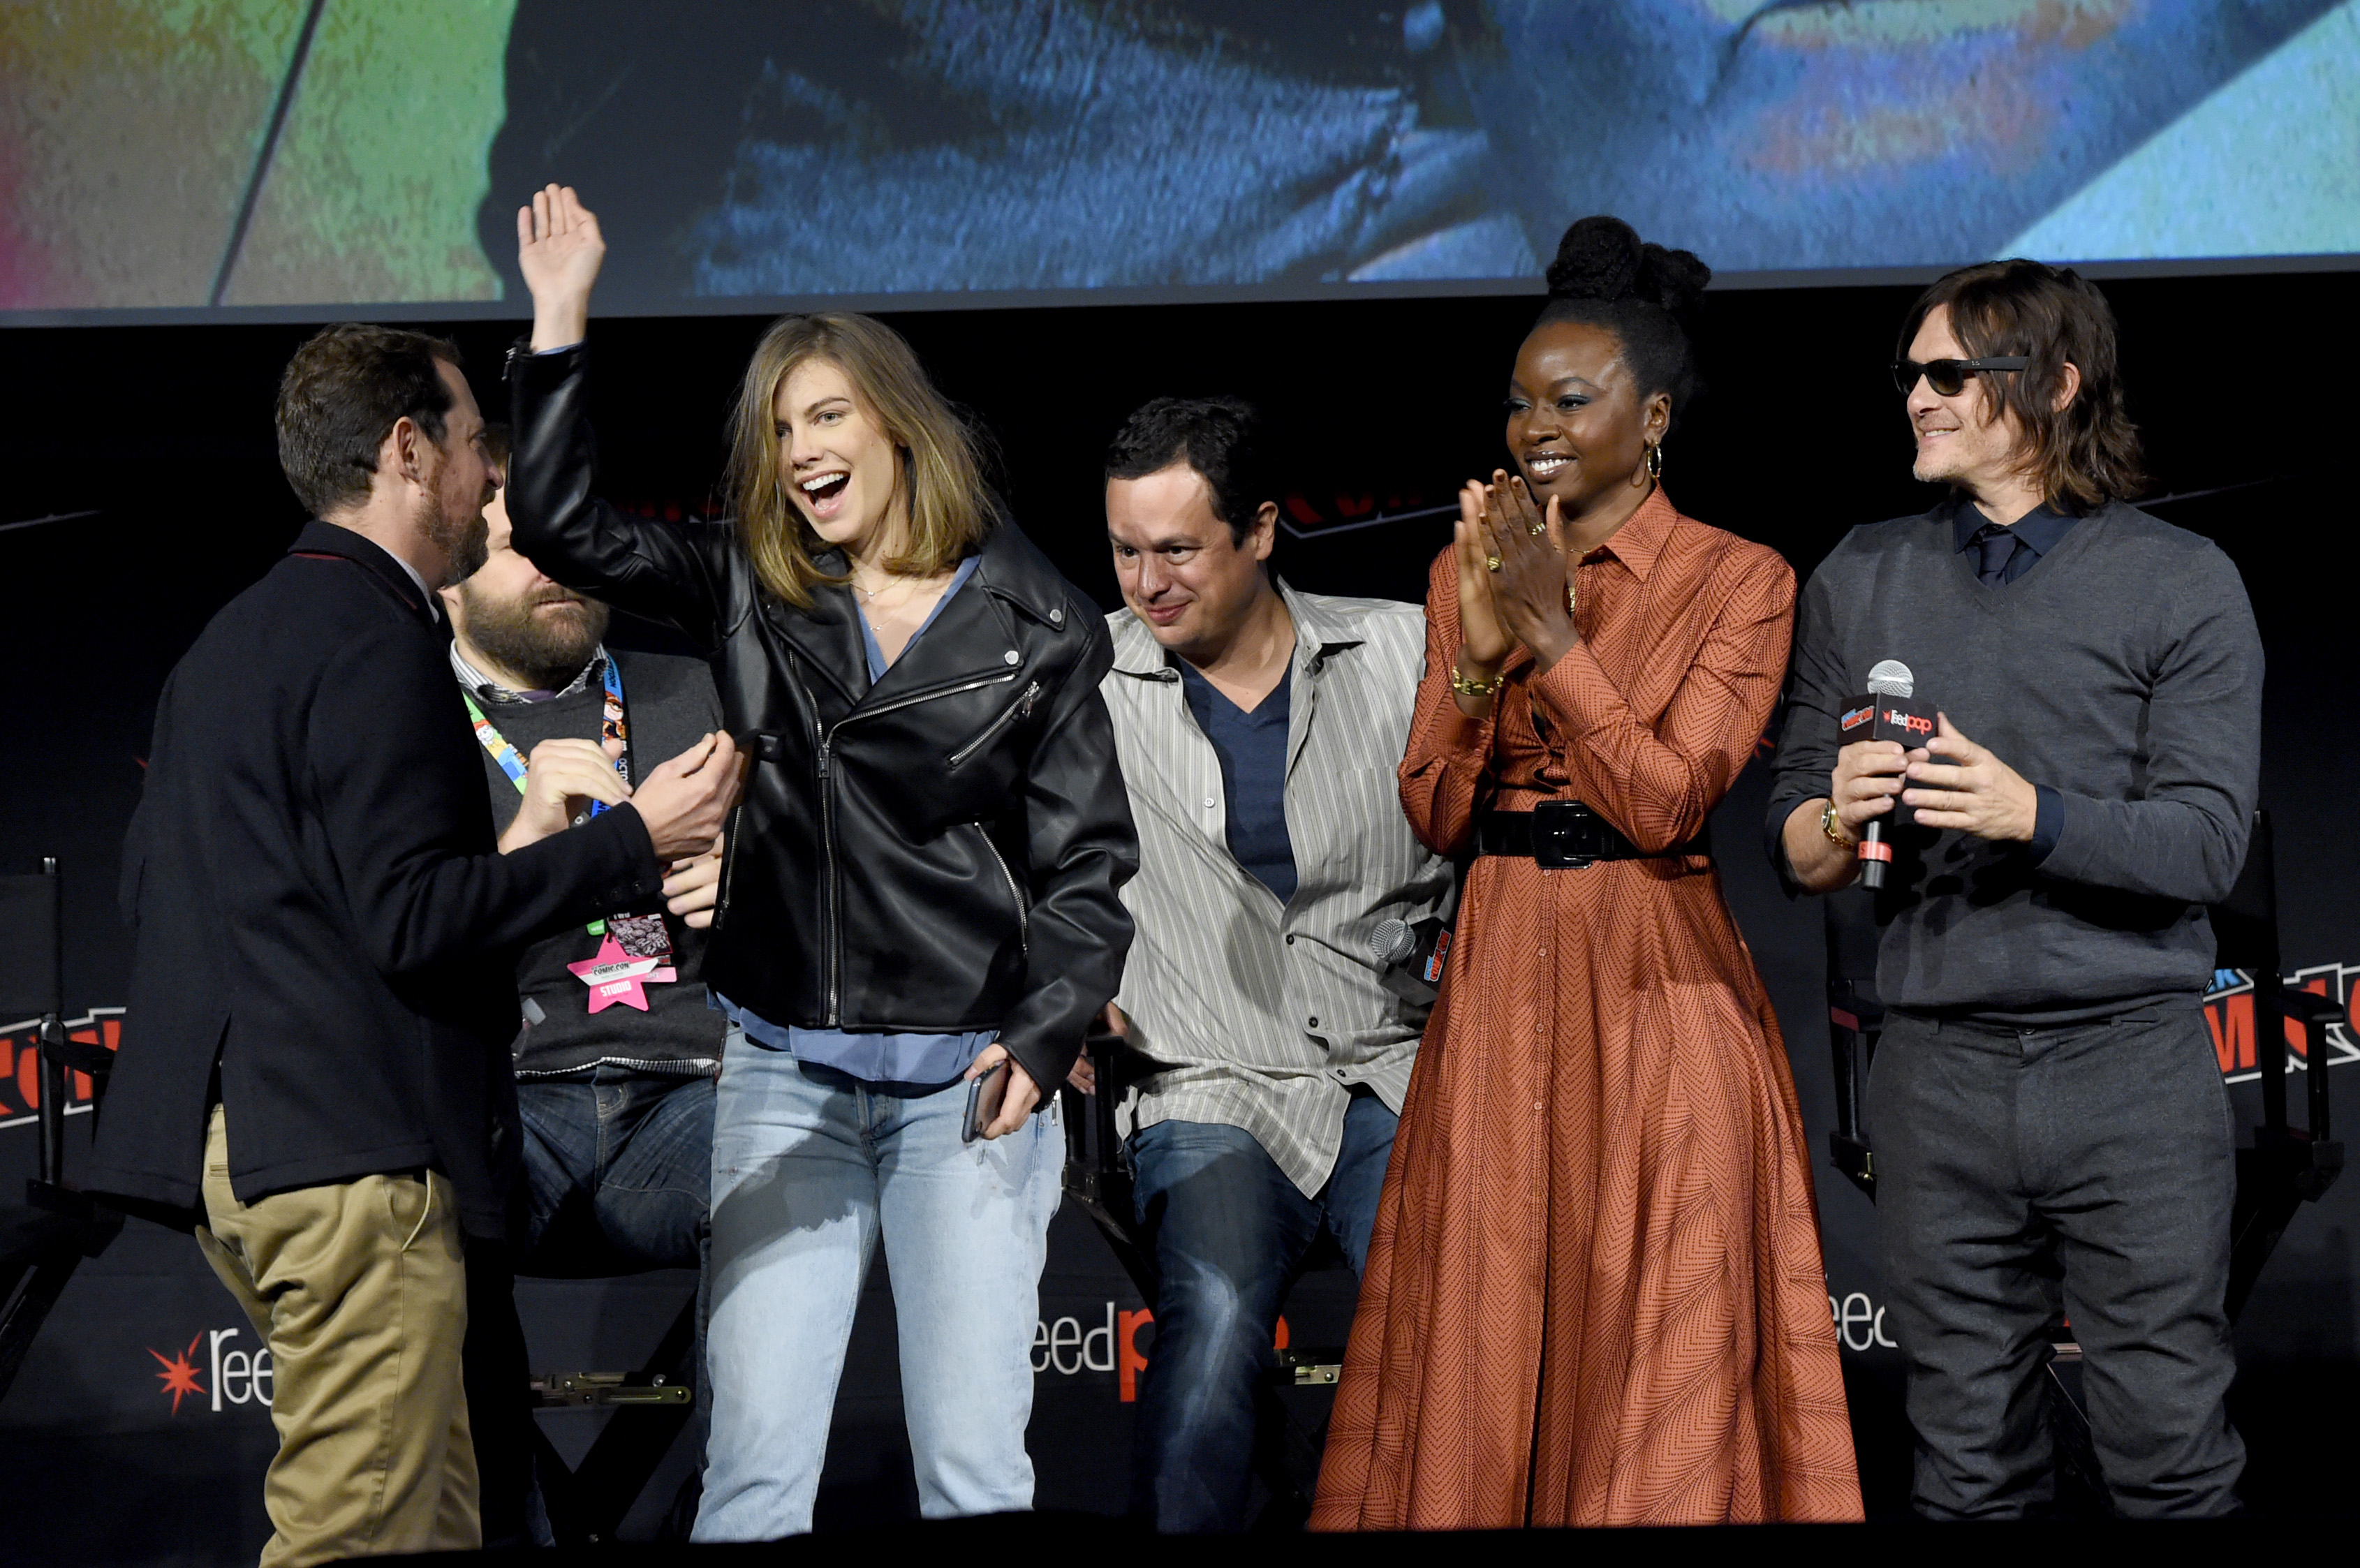 Exclusive: The Walking Dead' Cast Reacts to Lauren Cohan's Return at New York Comic Con 2019